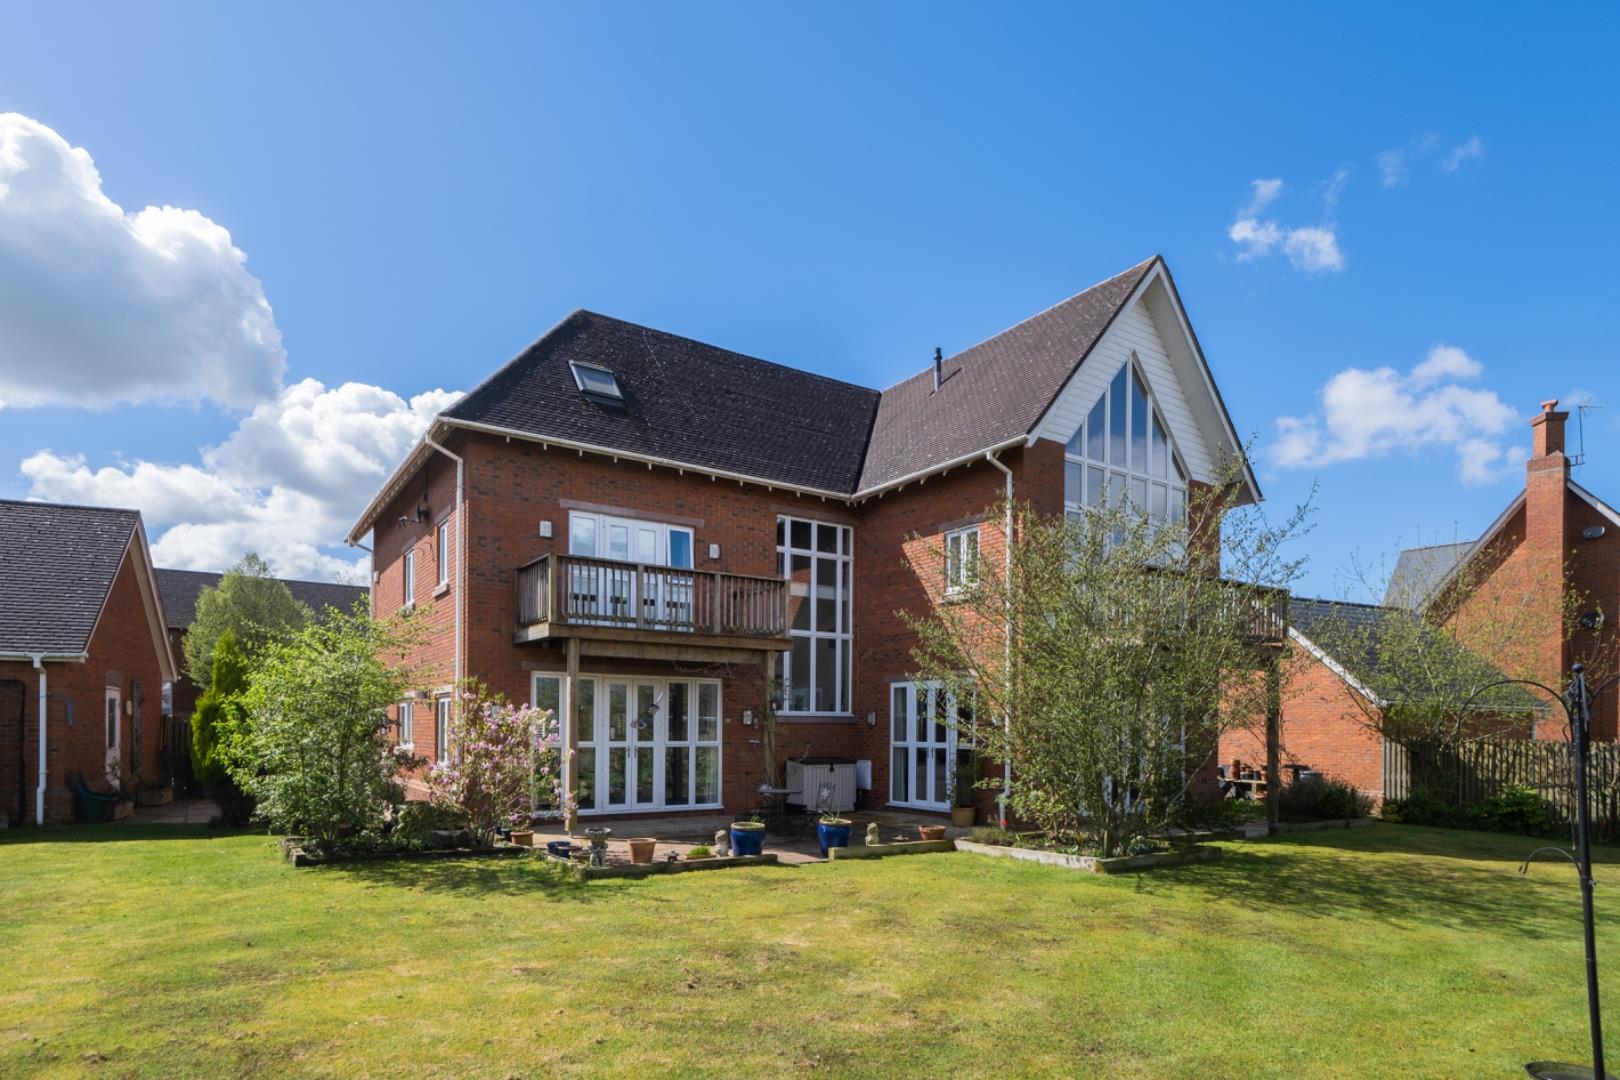 6 bedroom  Detached House for Sale in Wychwood Park